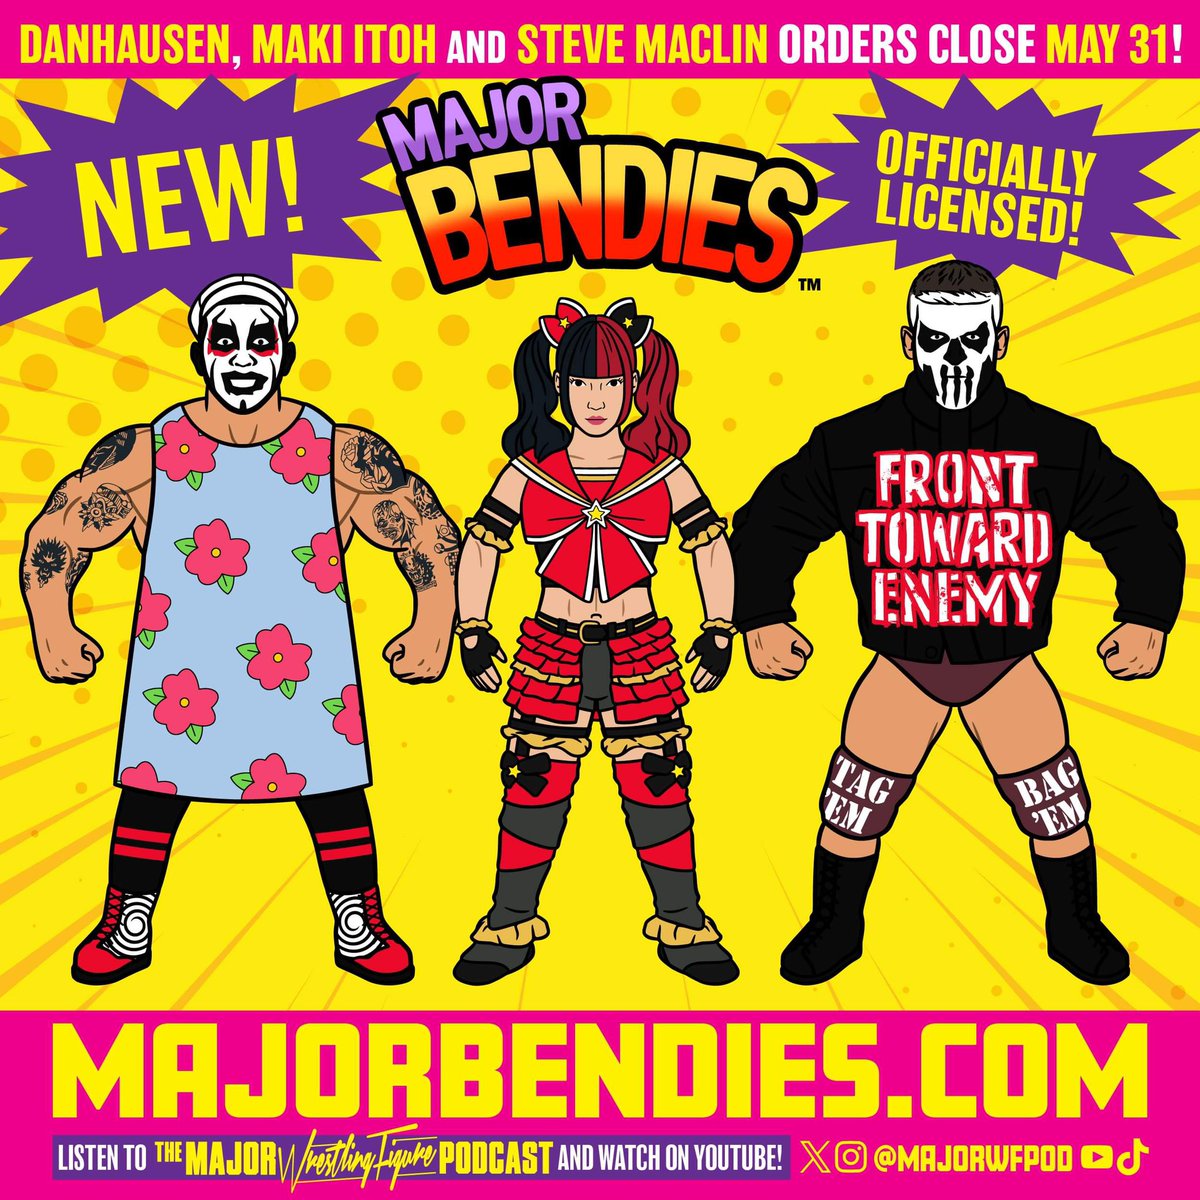 We are about half way though the month and then these #MajorBendies will no longer be available for pre-order. The pre-order is the order! Head to MajorBendies.com and get yours soon! #ScratchThatFigureItch